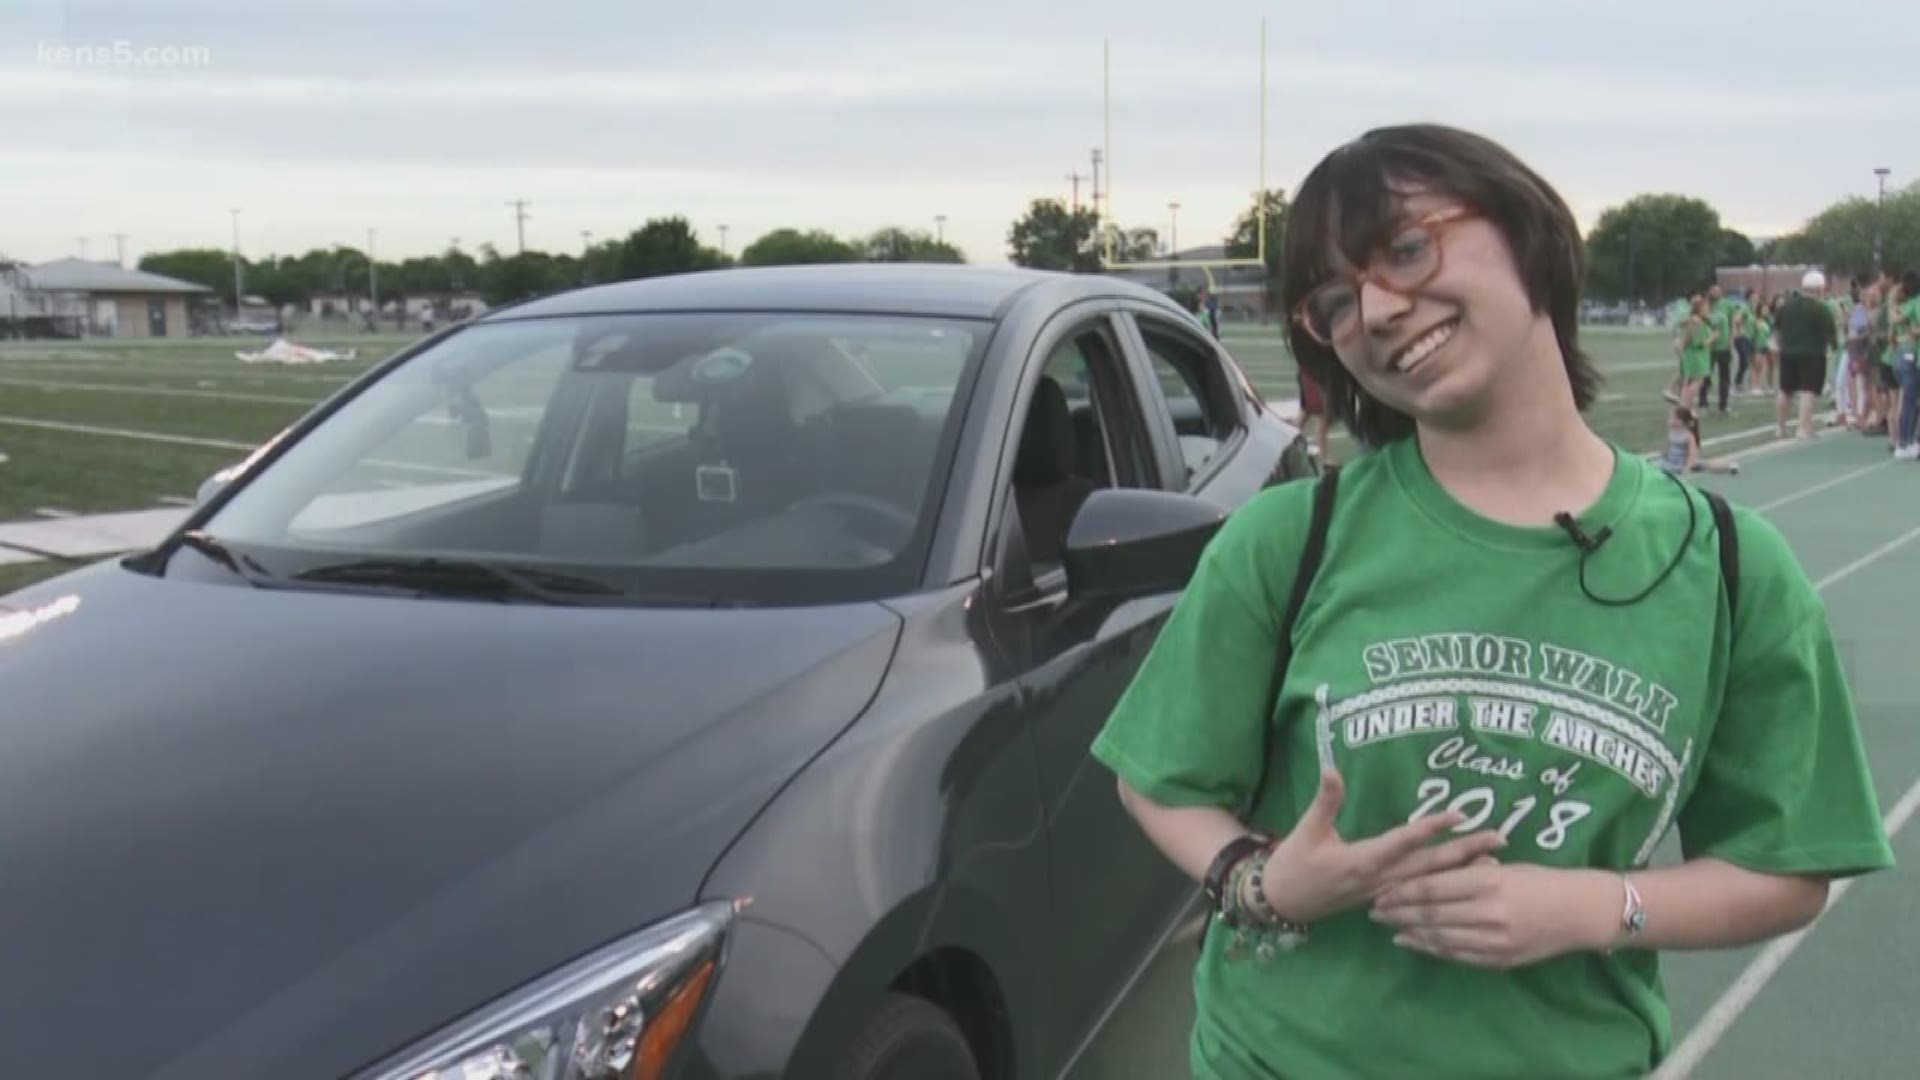 How can graduation week get any better for a high school senior? A new car might do the trick.